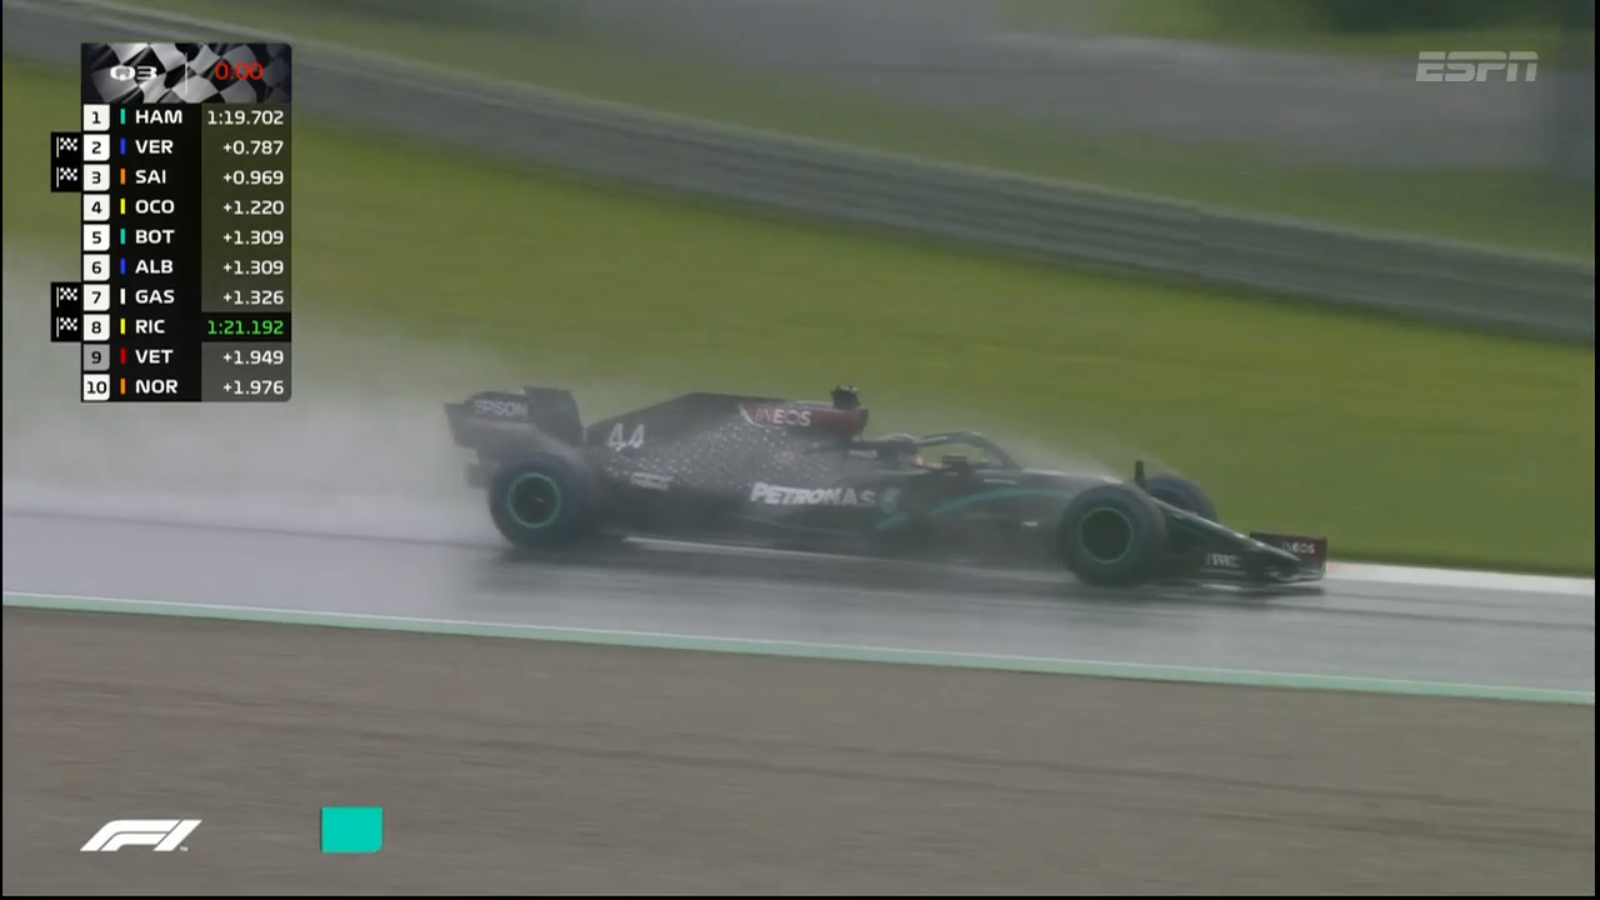 Mercedes' Lewis Hamilton, on Full Wets, in Q3 (Qualifying Round 3) on his way to winning Pole Position with a phenomenal lap time, especially based on the wet track conditions, but this is Lewis. (Note: The 'Full Wets' (blue) can dissipate 85 liters/ 22.45462 gallons per second.  The intermediates (green), used when the track is wet in some areas and dry in others, can dissipate 30 liters/ 7.92516 gallons per second.)